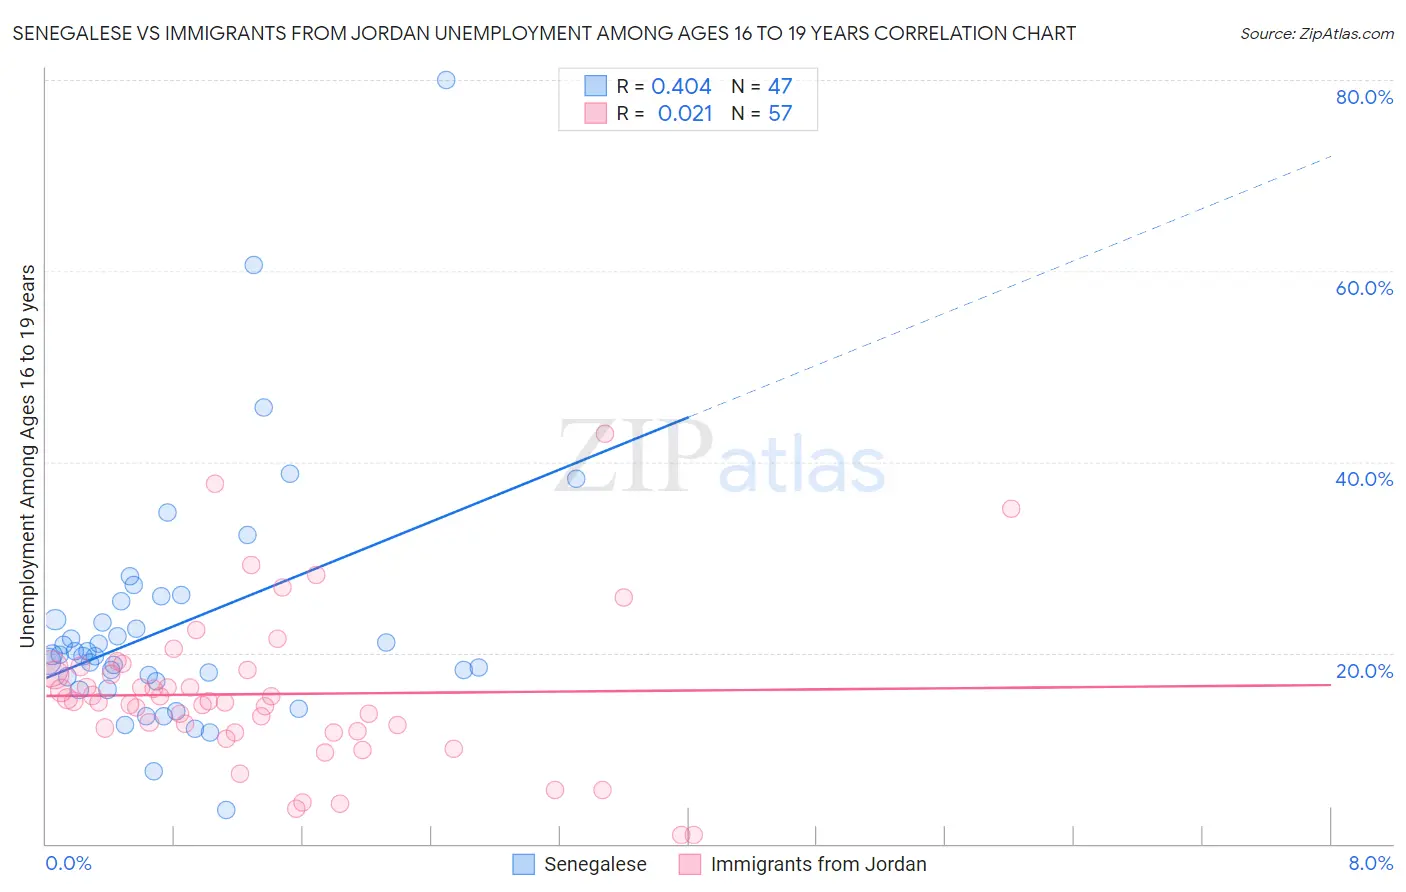 Senegalese vs Immigrants from Jordan Unemployment Among Ages 16 to 19 years